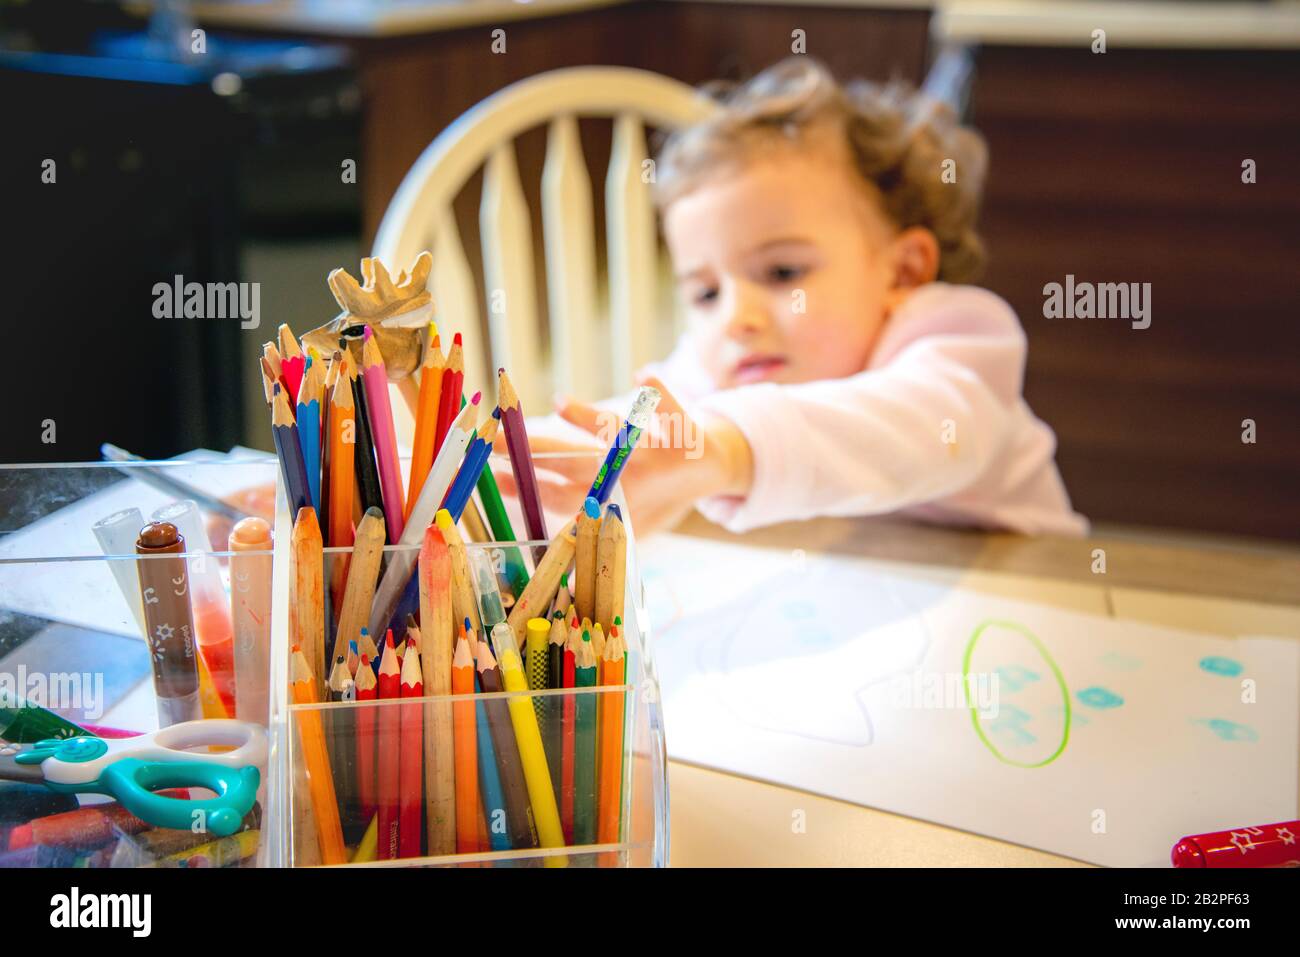 colored pencils in the foreground in focus, child reaching across to select different one. Stock Photo